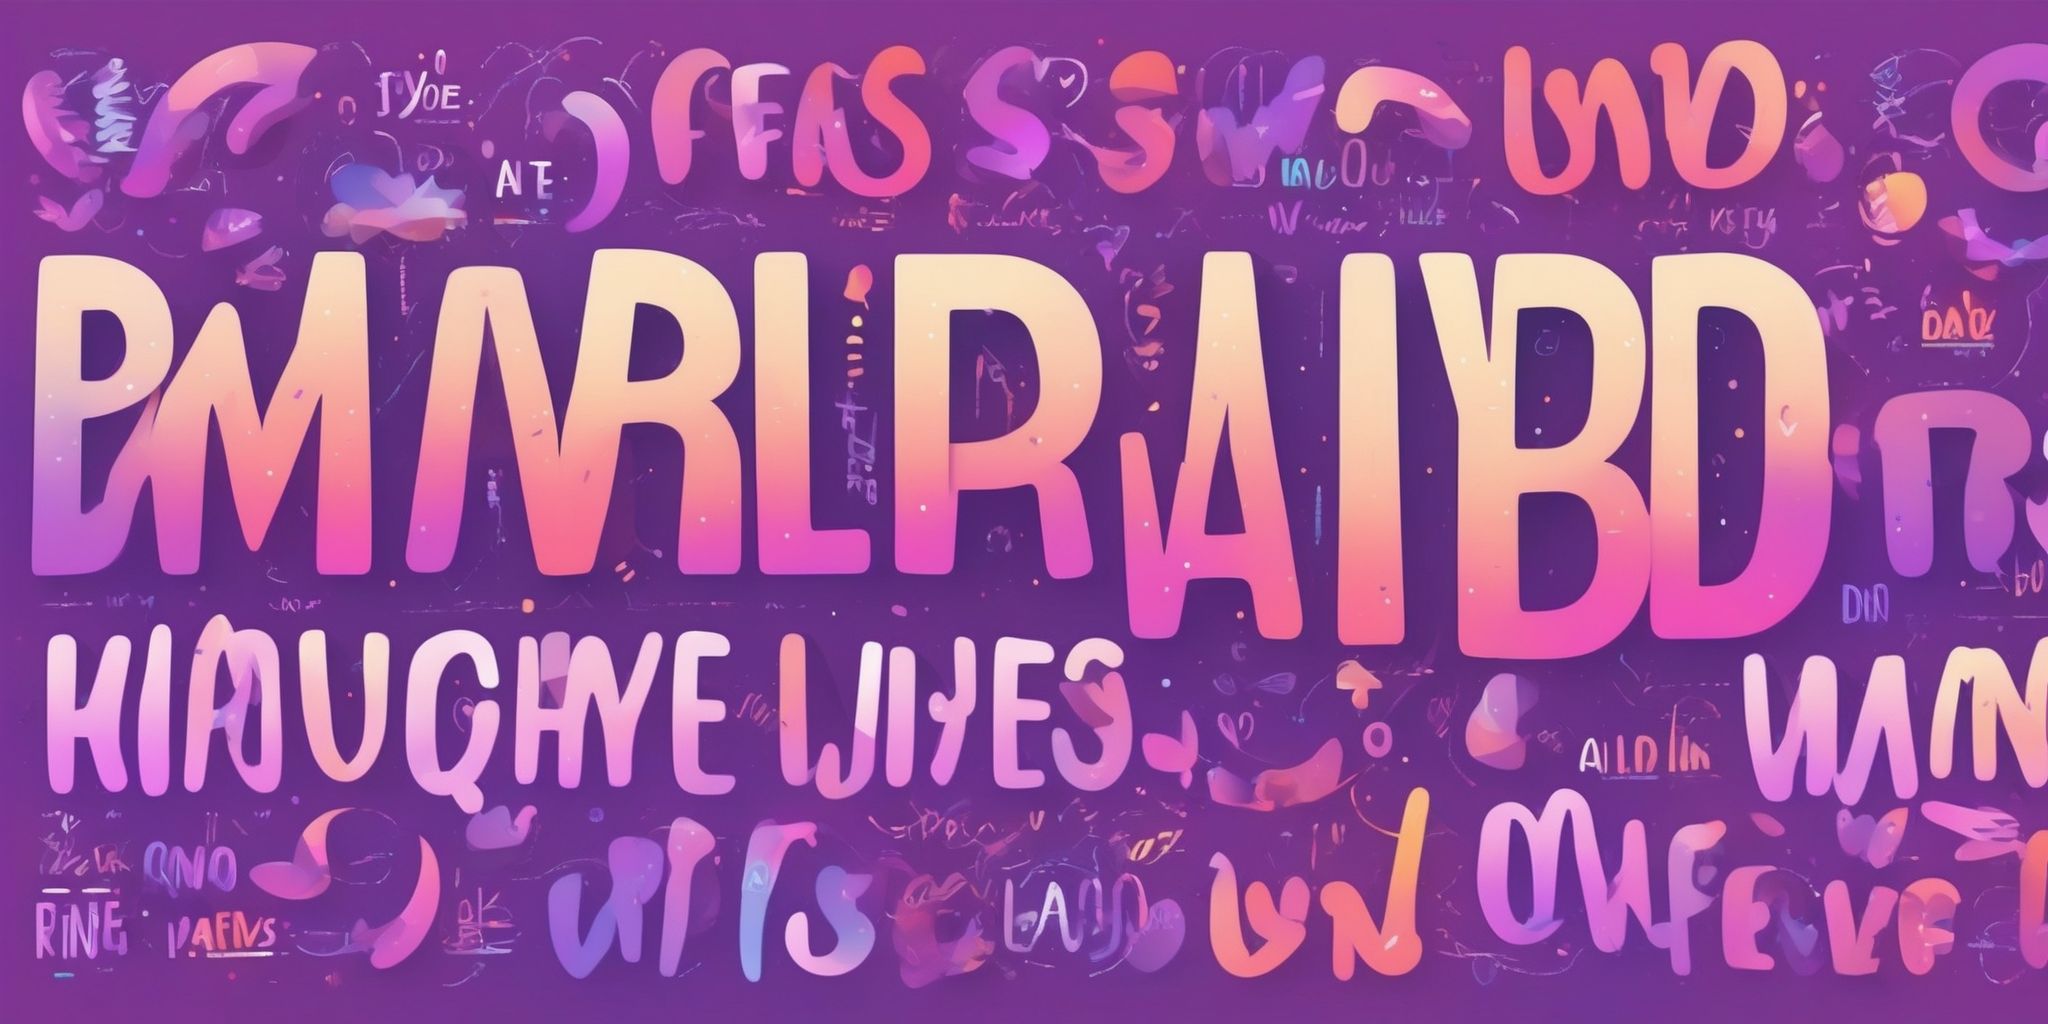 Words in flat illustration style, colorful purple gradient colors